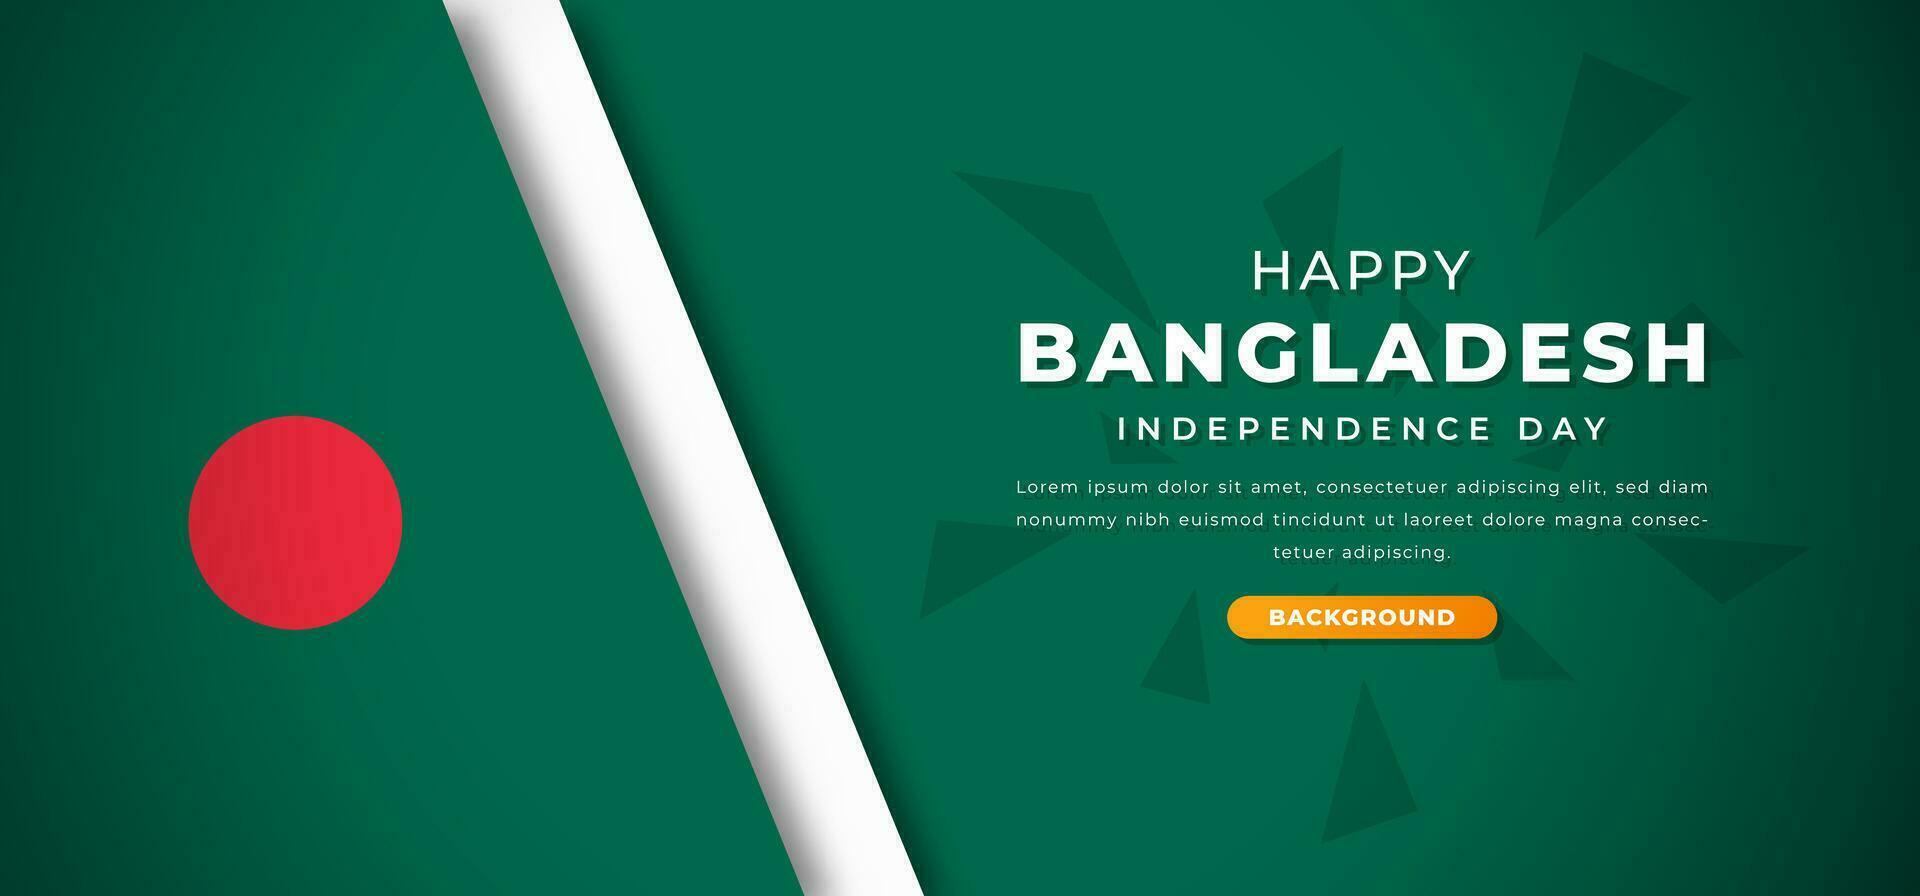 Happy Bangladesh Independence Day Design Paper Cut Shapes Background Illustration for Poster, Banner, Advertising, Greeting Card vector